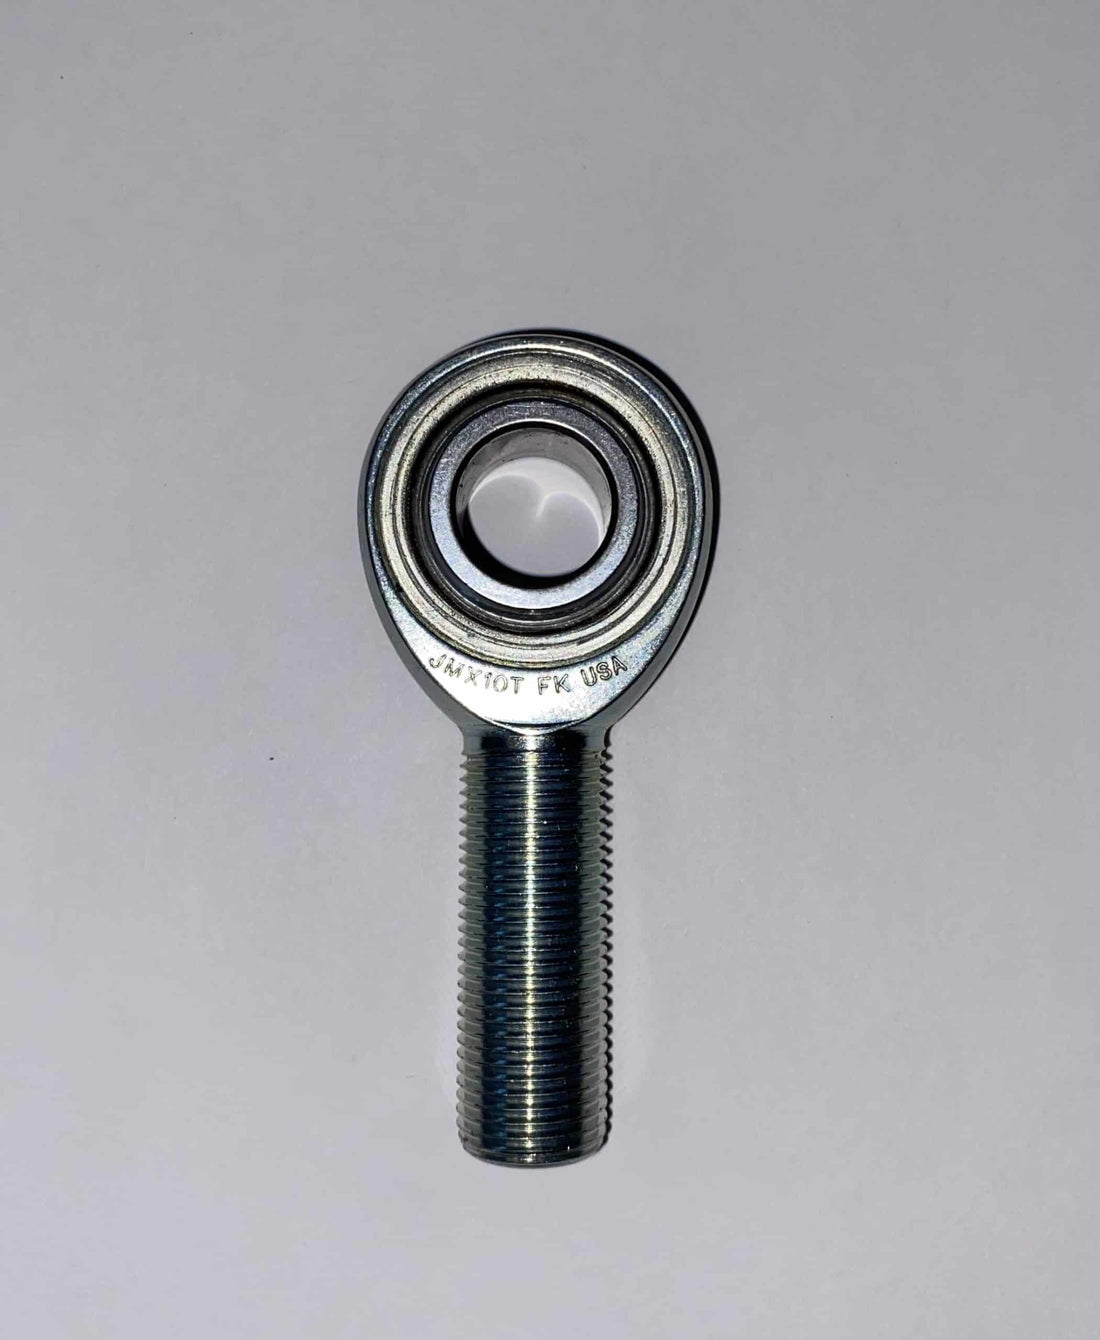 FK Rod Ends 5/8" Right Hand Thread 5/8" Hole JMX10T PTFE Coated Chromoly Heim Joints F2 Fit